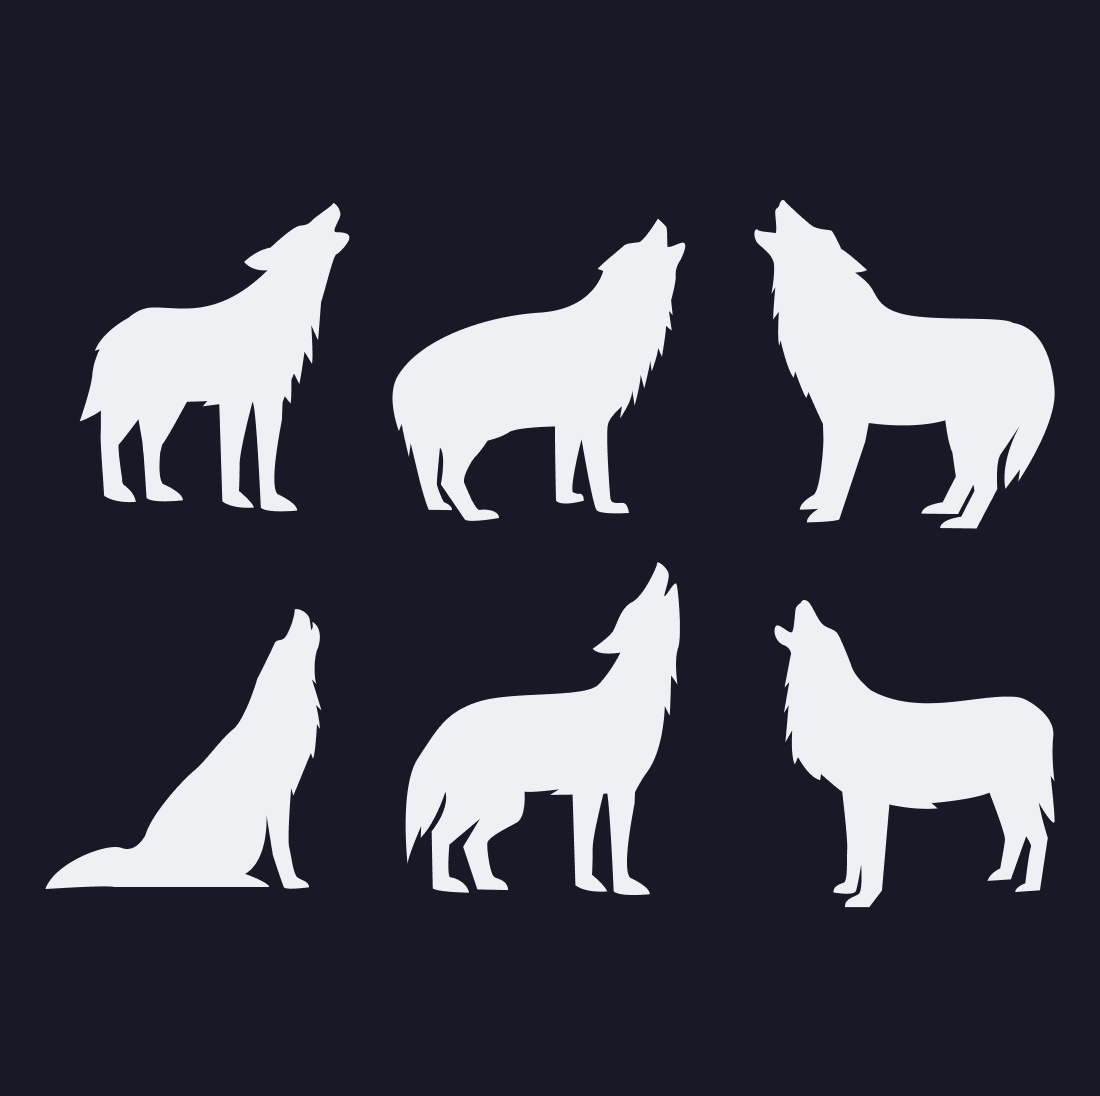 Set of white silhouettes of wolfs on a black background.